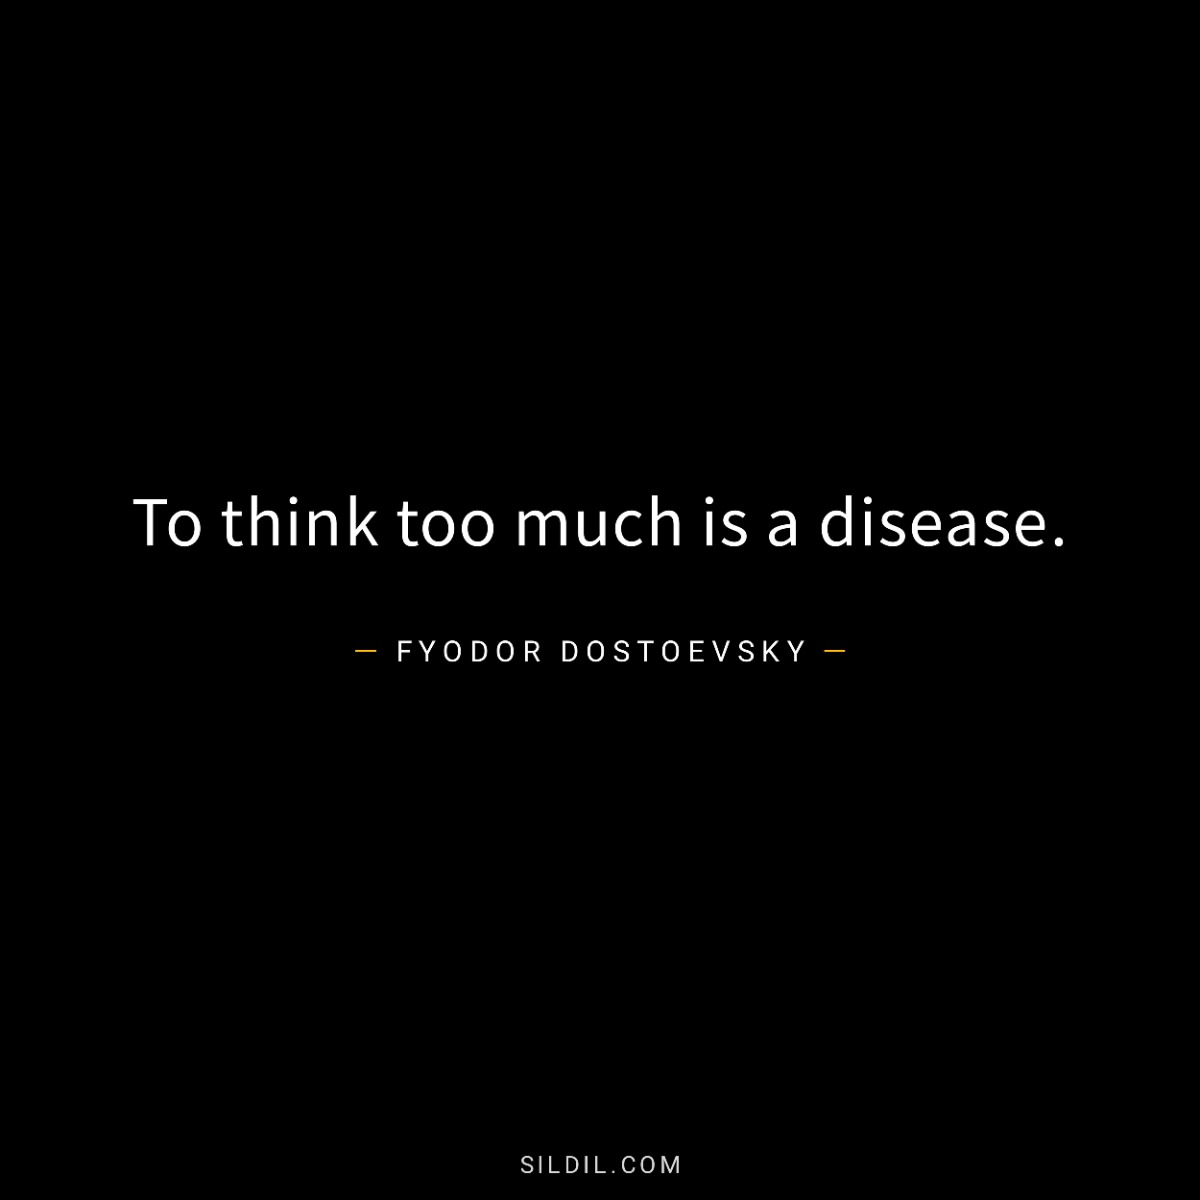 To think too much is a disease.